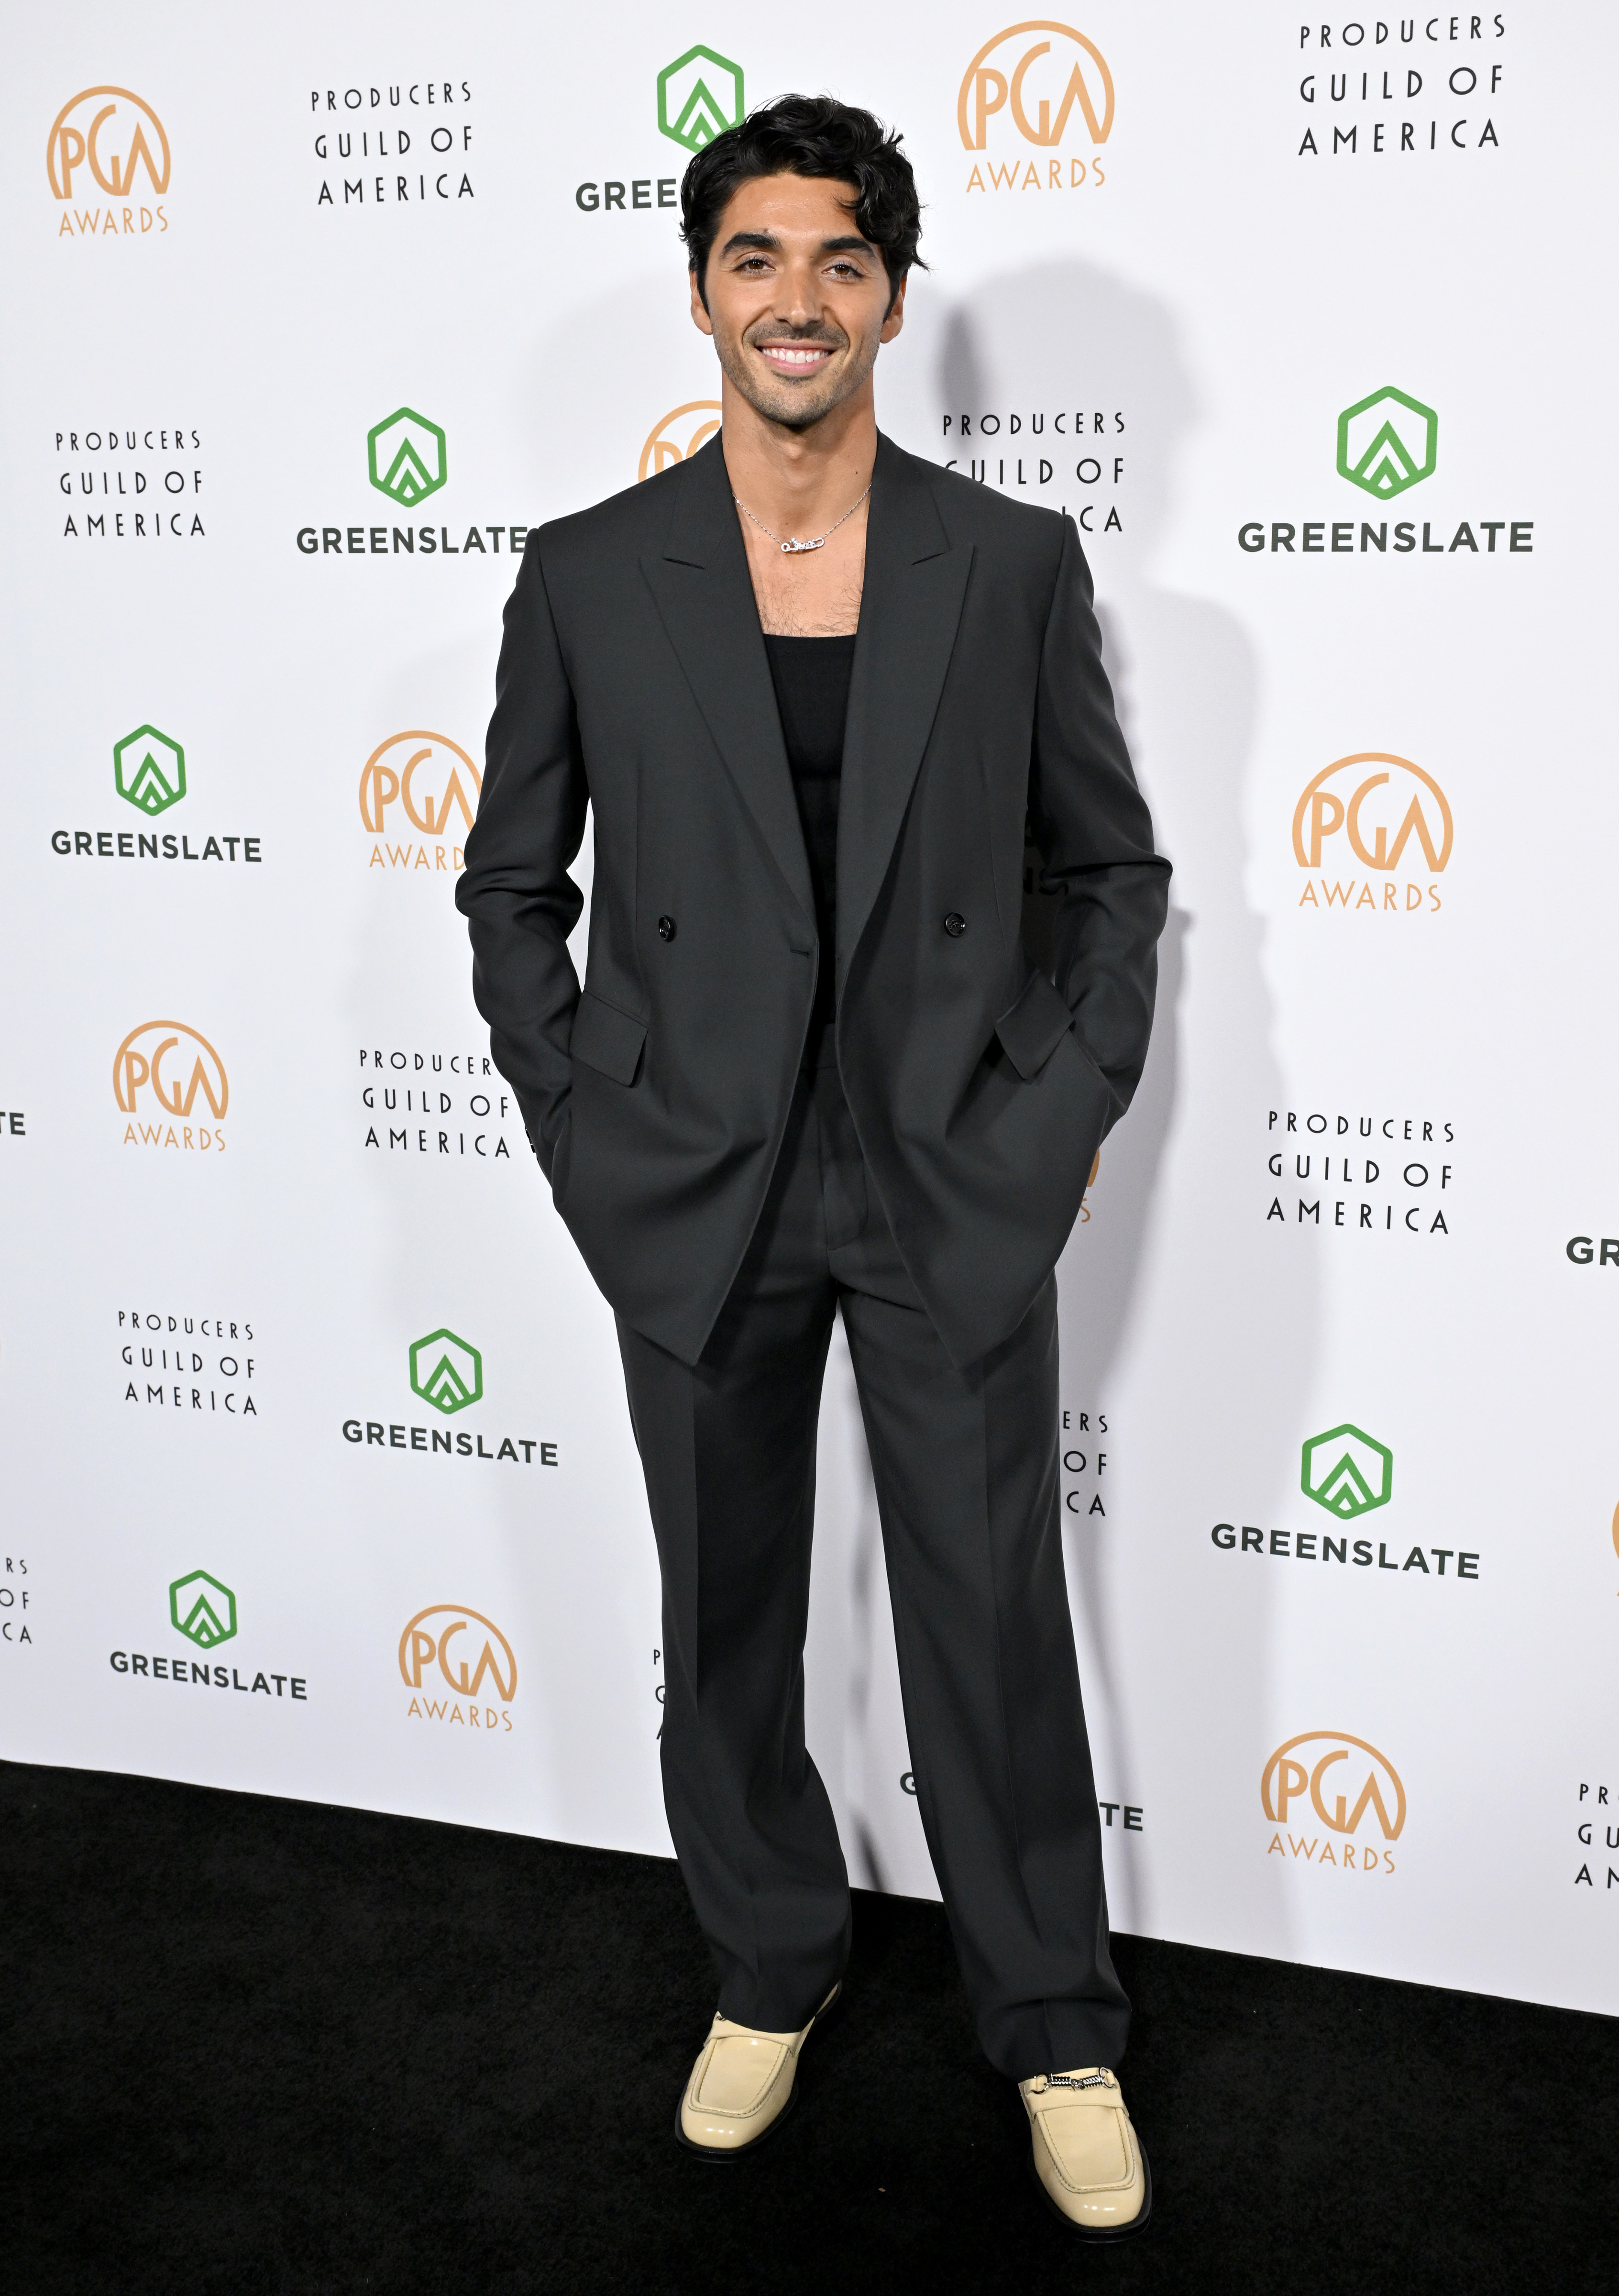 Taylor in a oversized suit with sneakers poses at the Producers Guild Awards